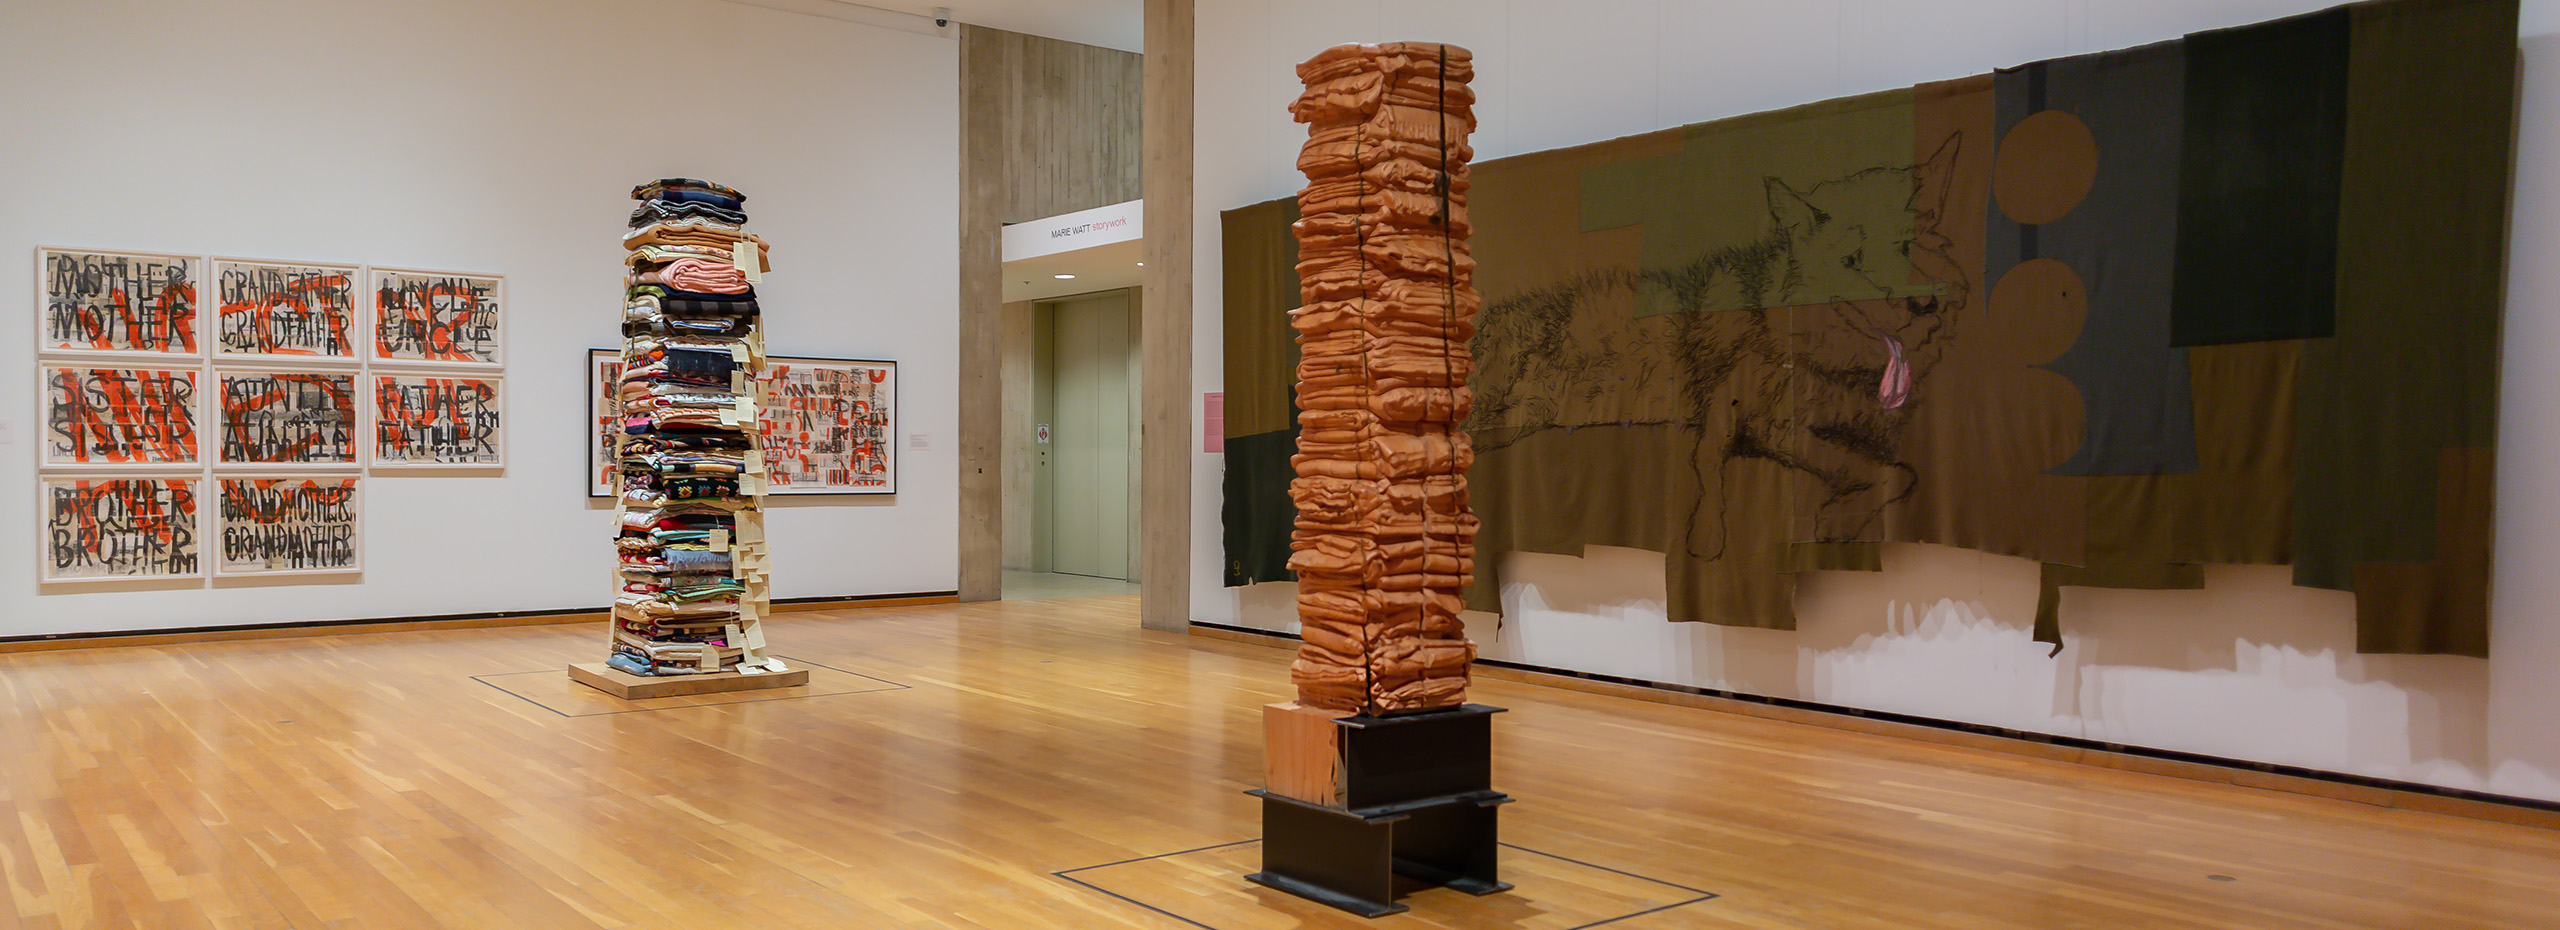 A museum gallery with two tall pillar sculptures in the center, framed prints hanging on one wall, and a large dark textile hanging on the other wall